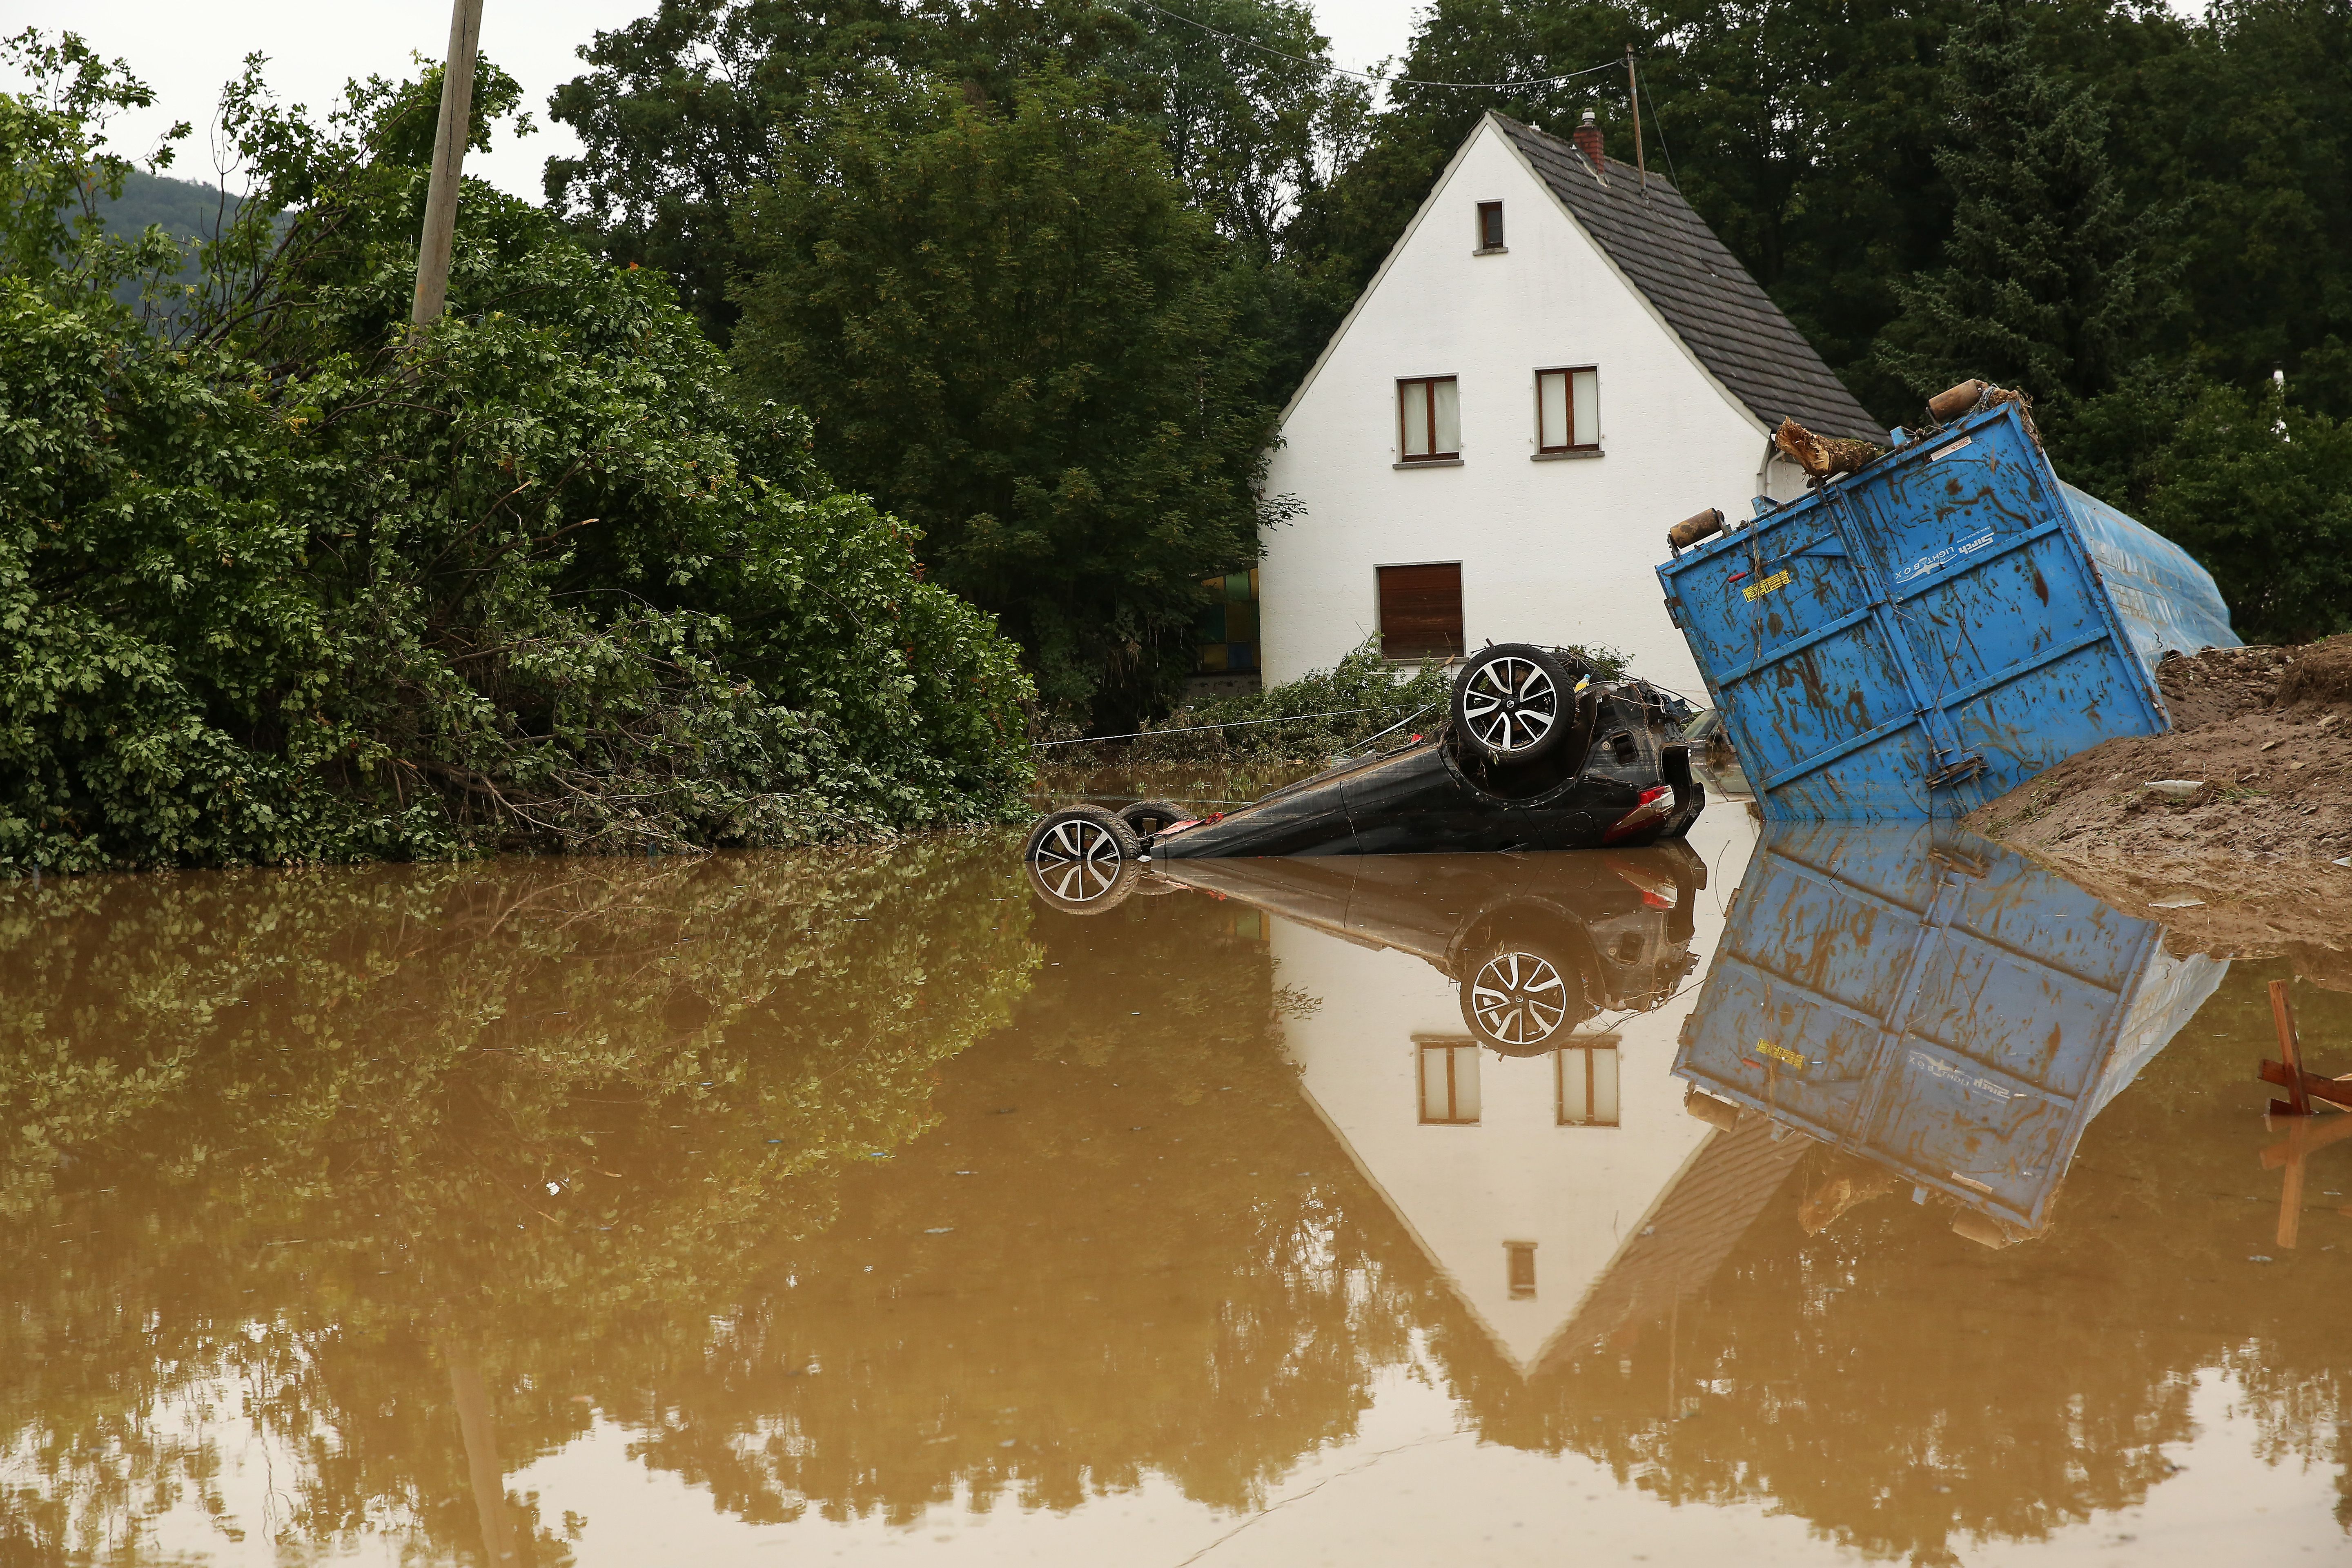 A car sits sunken in a deluged area after a major flood in the Ahrlweiler district of Germany's mountainous Eifel area.